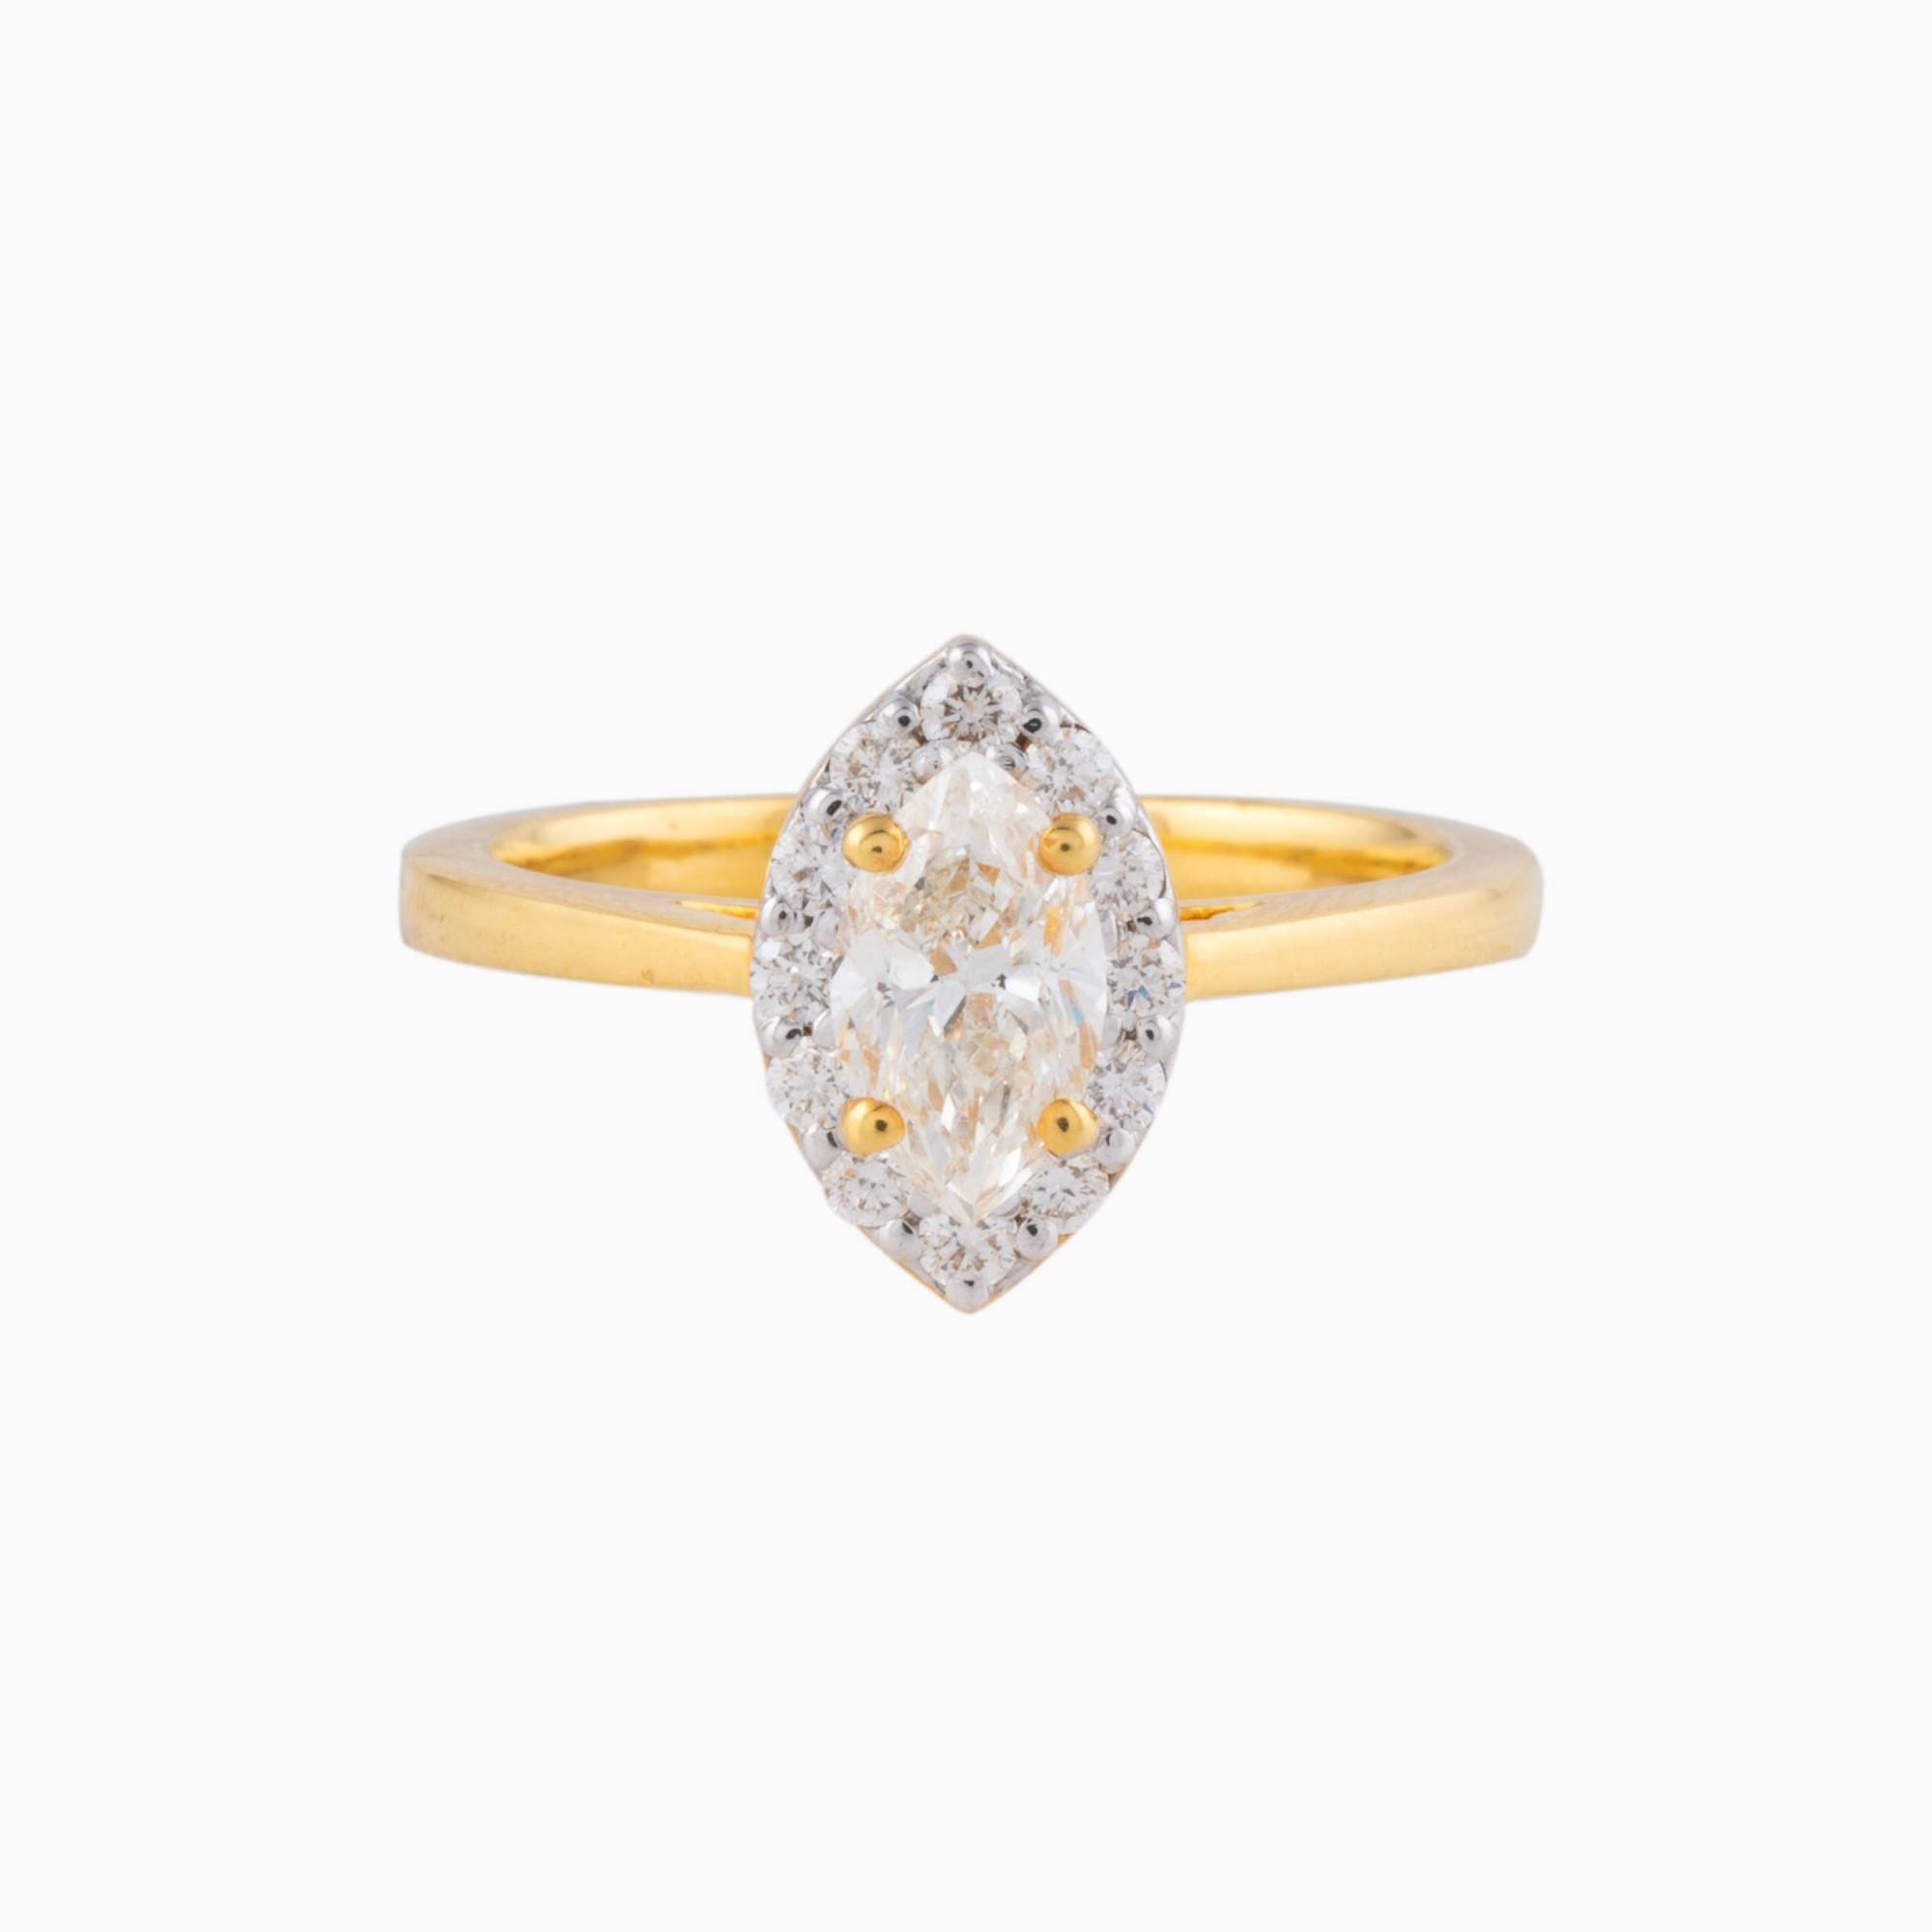 Ring with Round Cut Diamond and Marquise Cut Diamond - WDN961